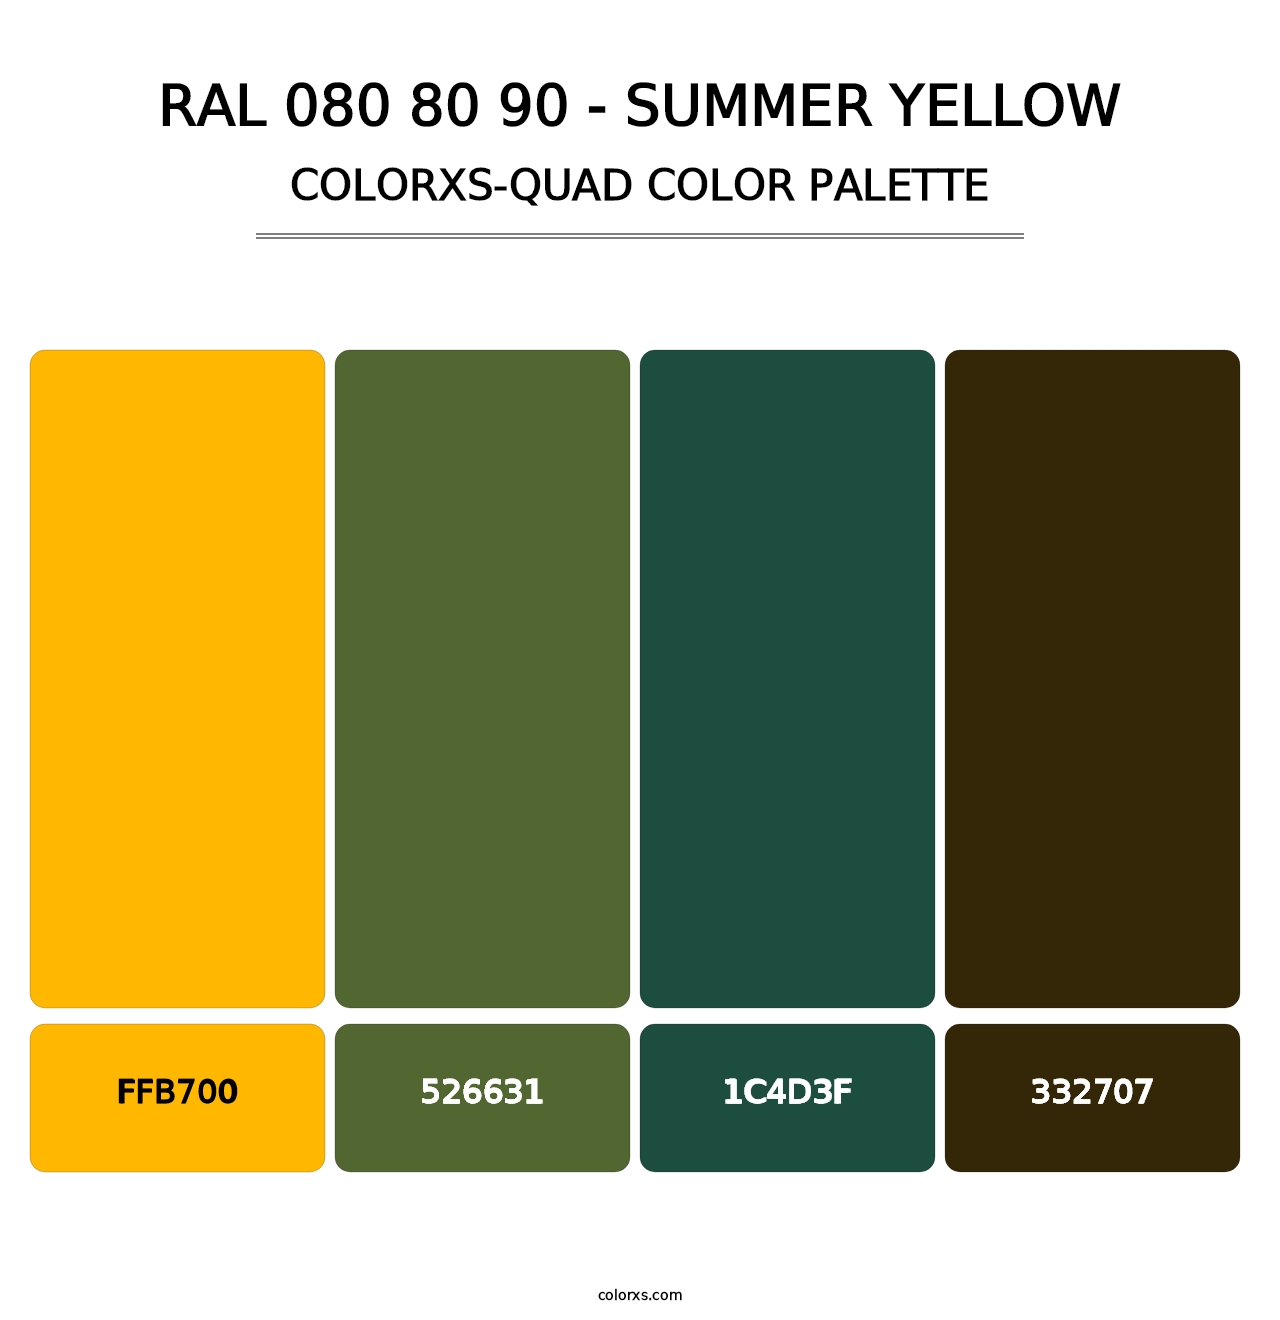 RAL 080 80 90 - Summer Yellow - Colorxs Quad Palette